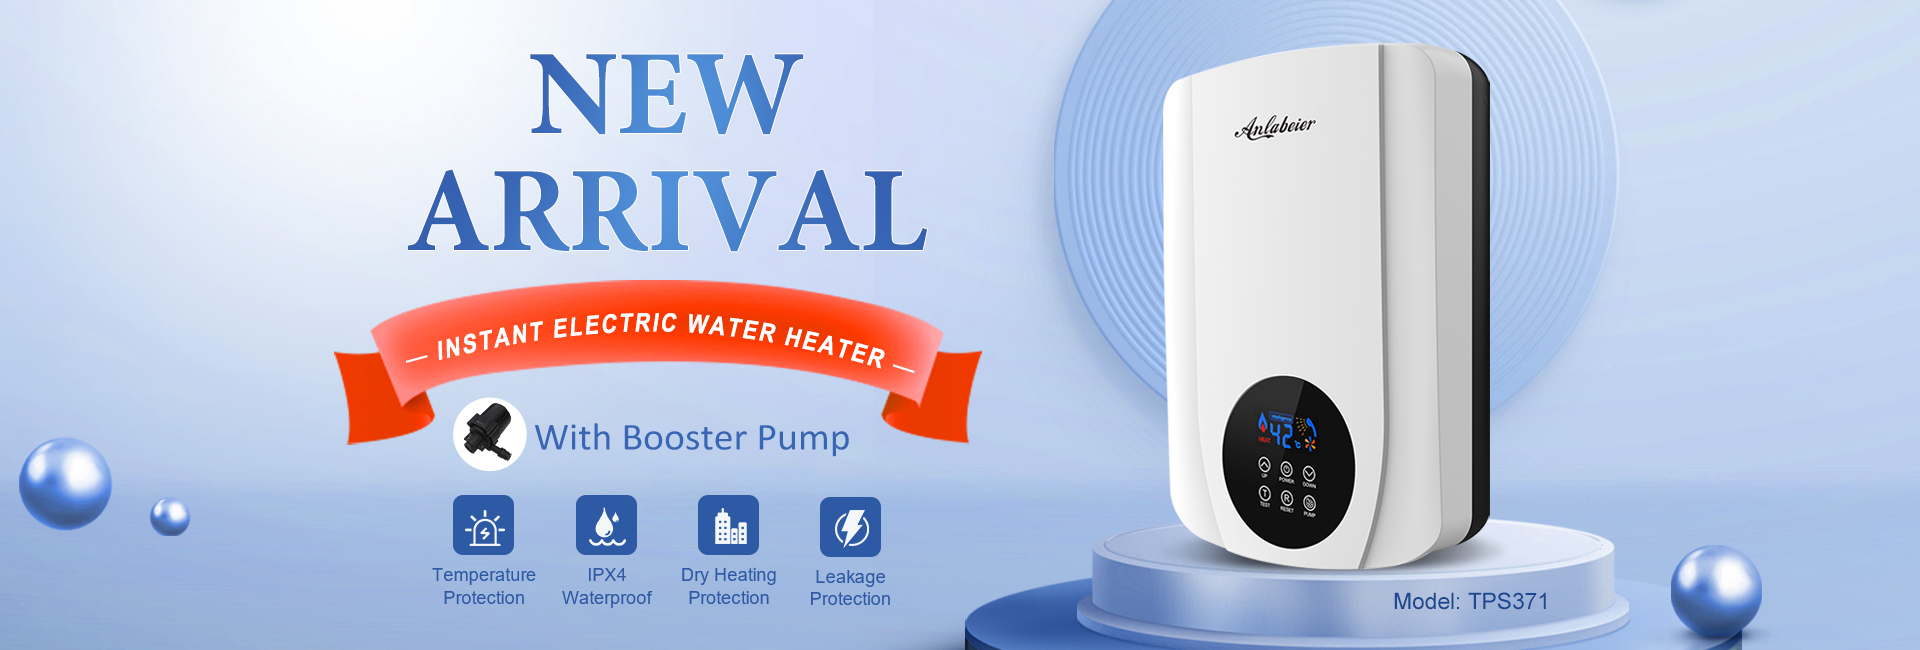 New water heater with pump